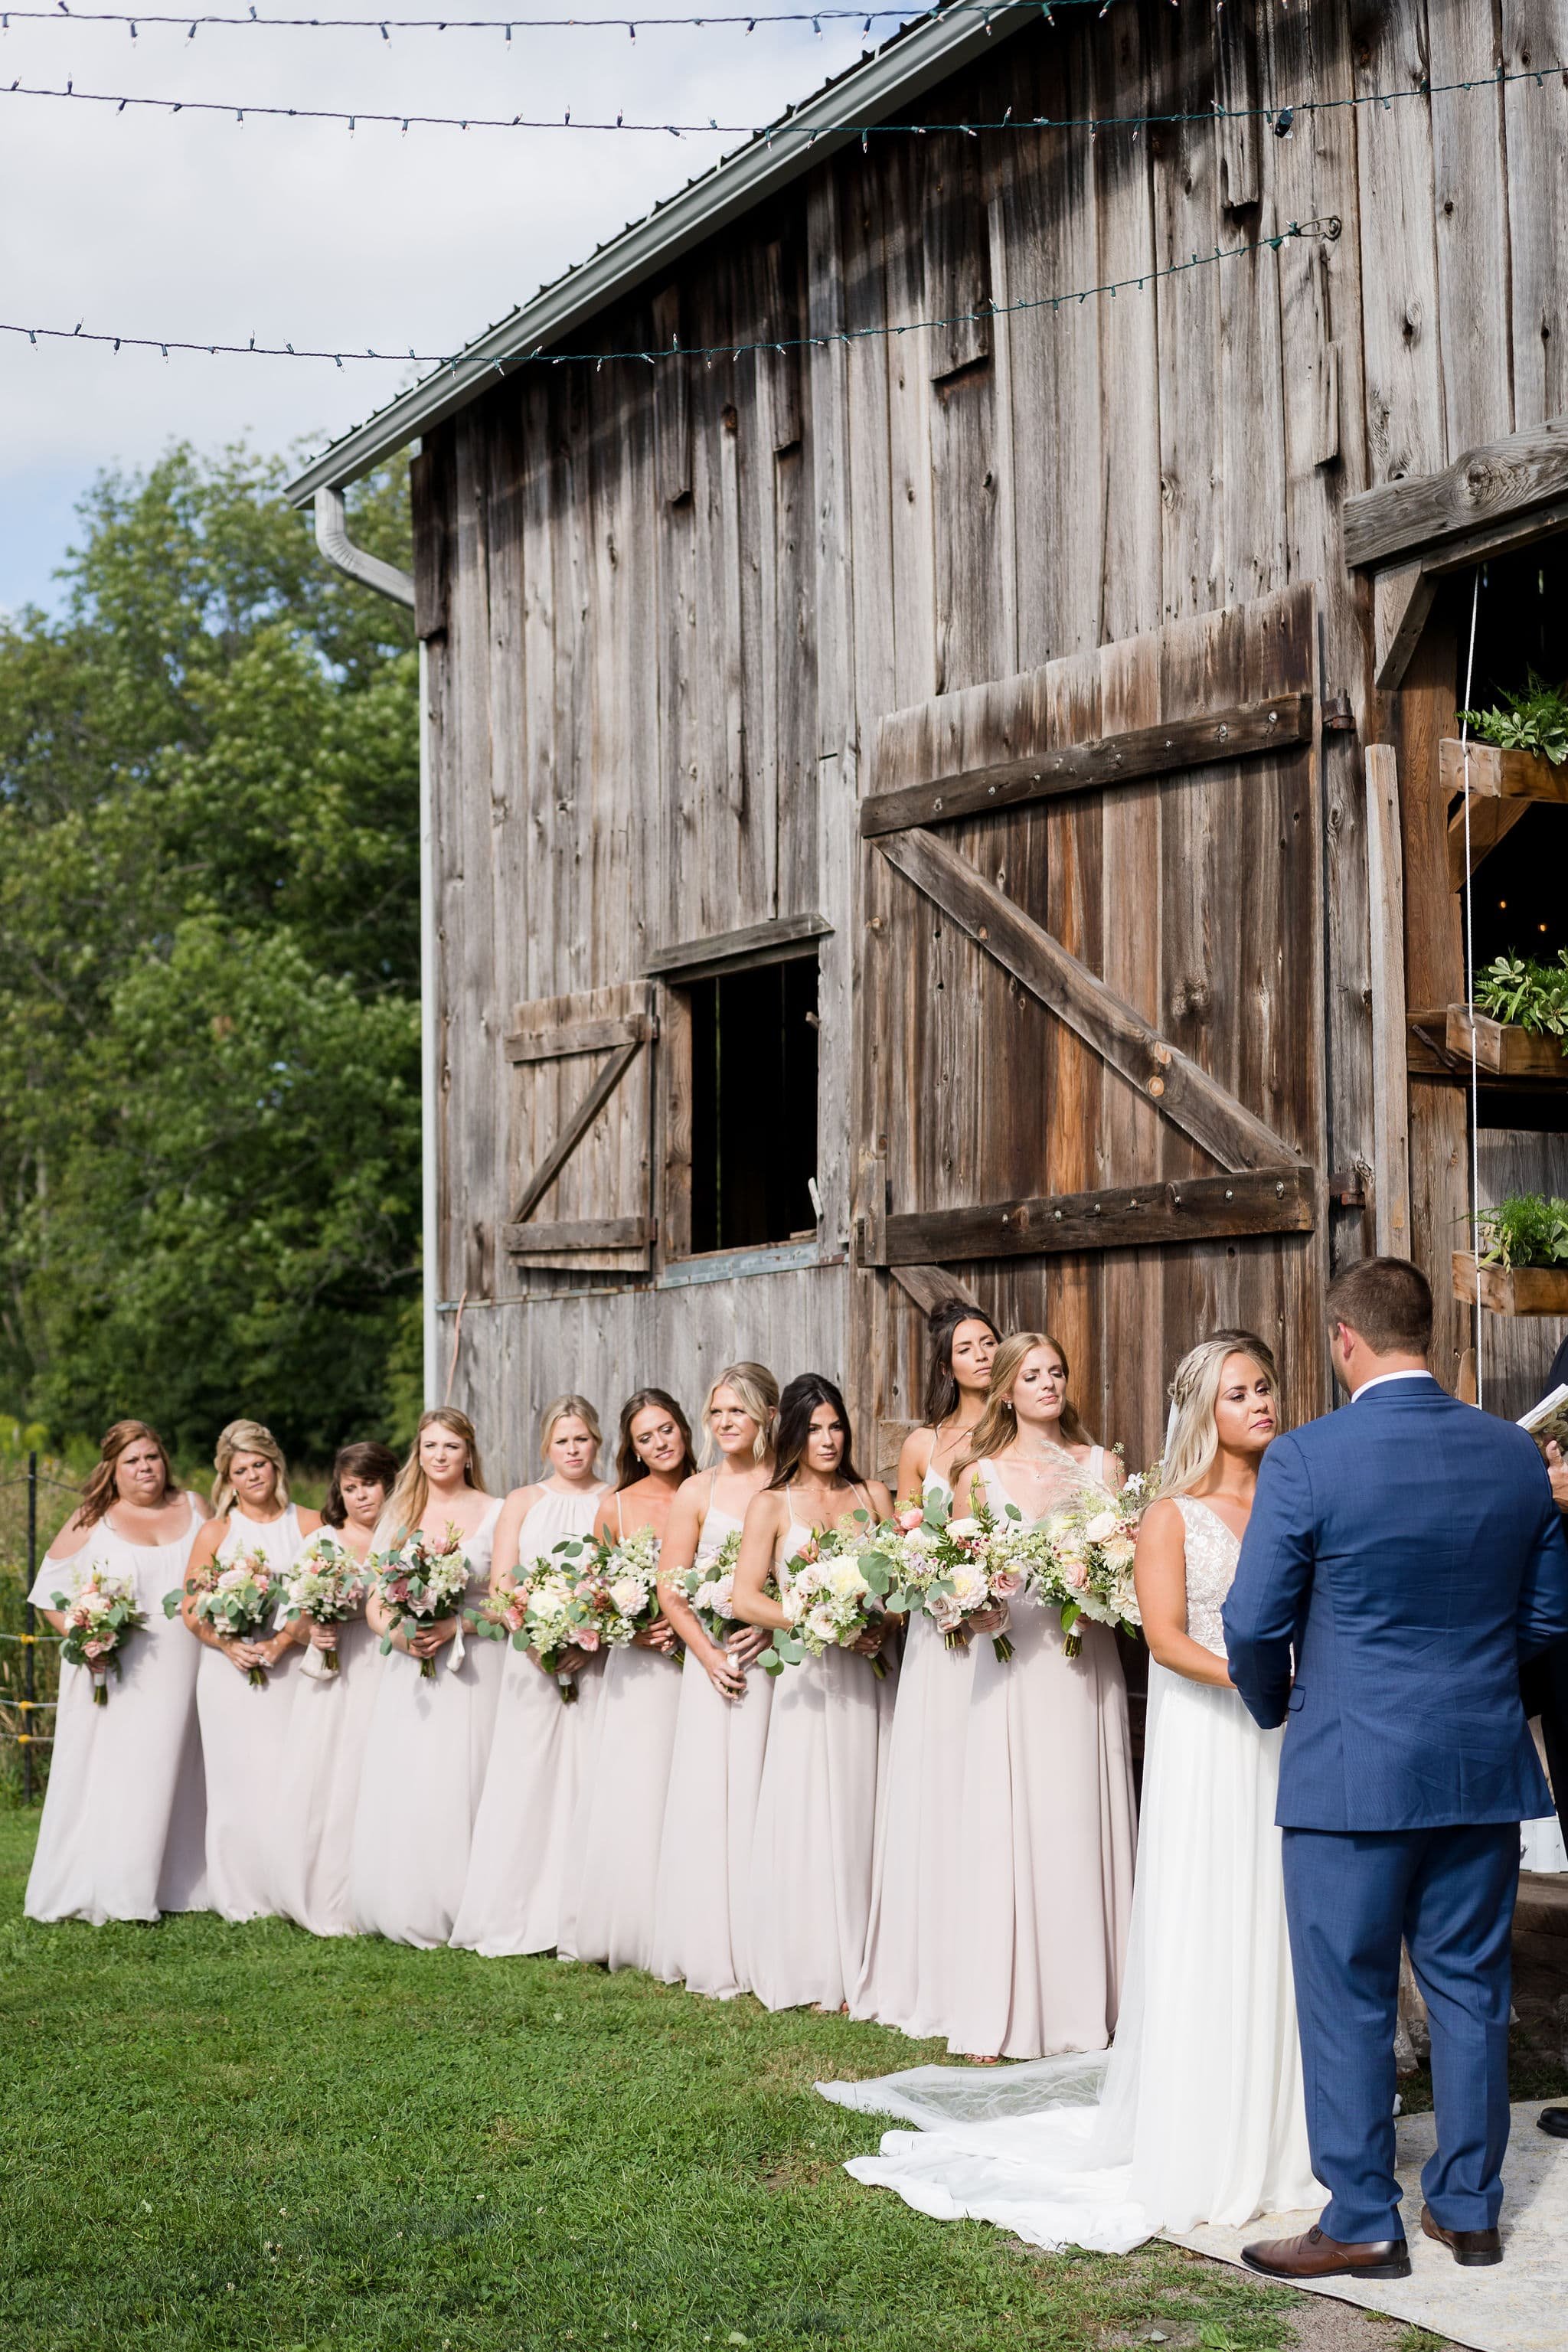 Bridal Party During Ceremony at Fox Hill Farm in Honesdale PA.jpg